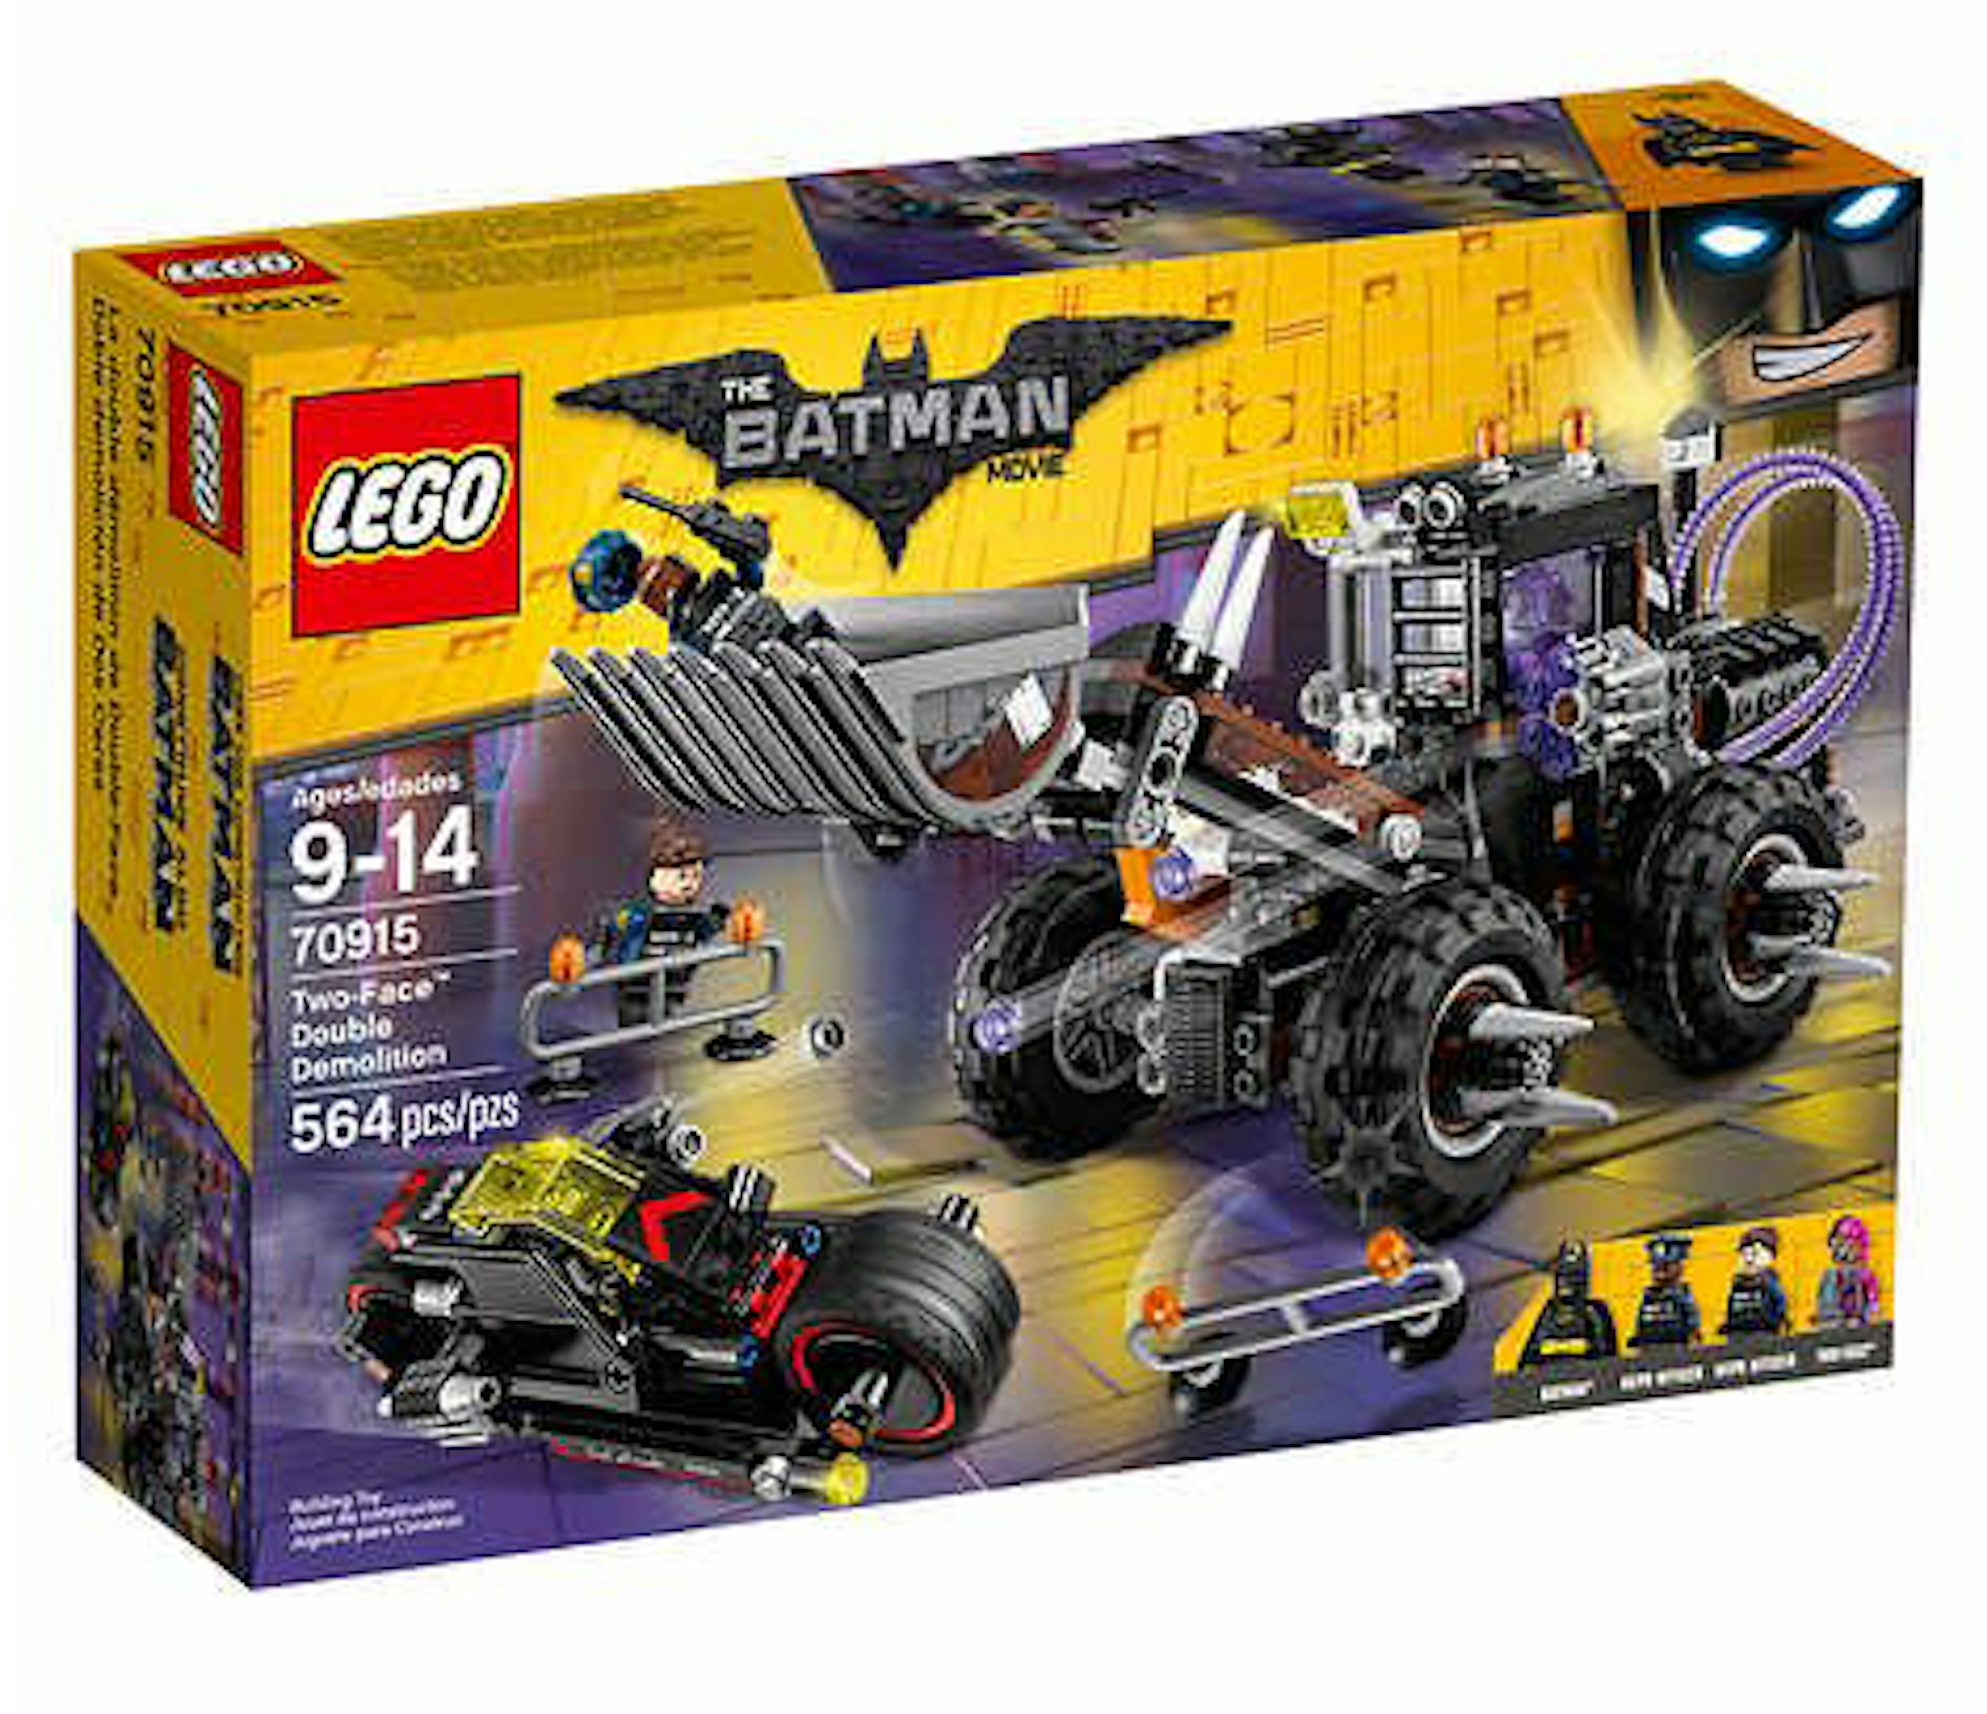 LEGO did everything right with its new 2,500-piece vintage Batman set